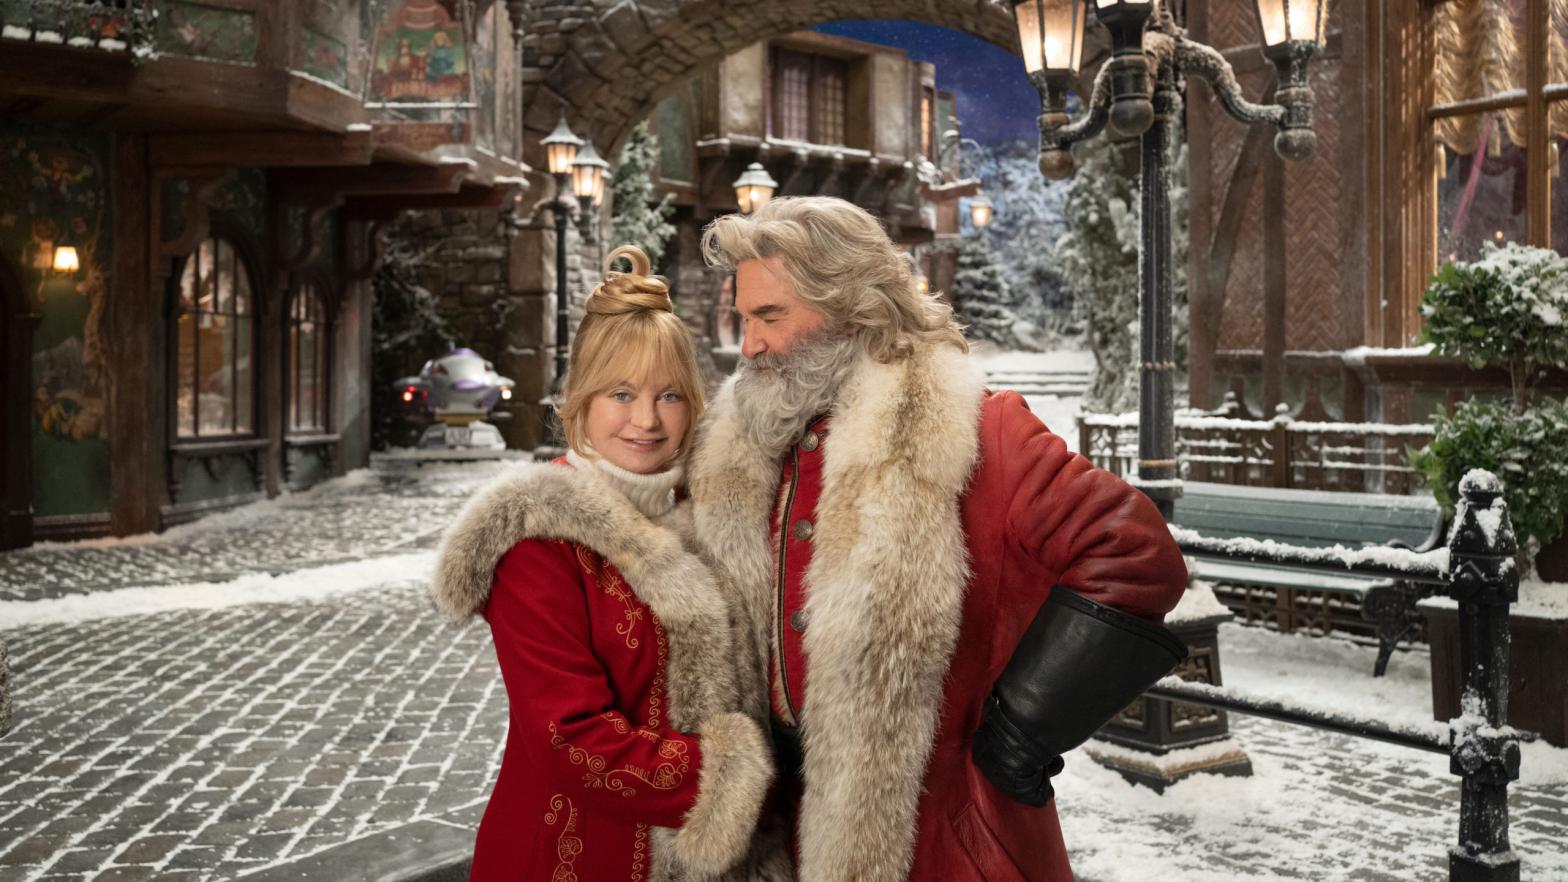 Goldie Hawn and Kurt Russell star in The Christmas Chronicles 2.  (Image: Netflix)